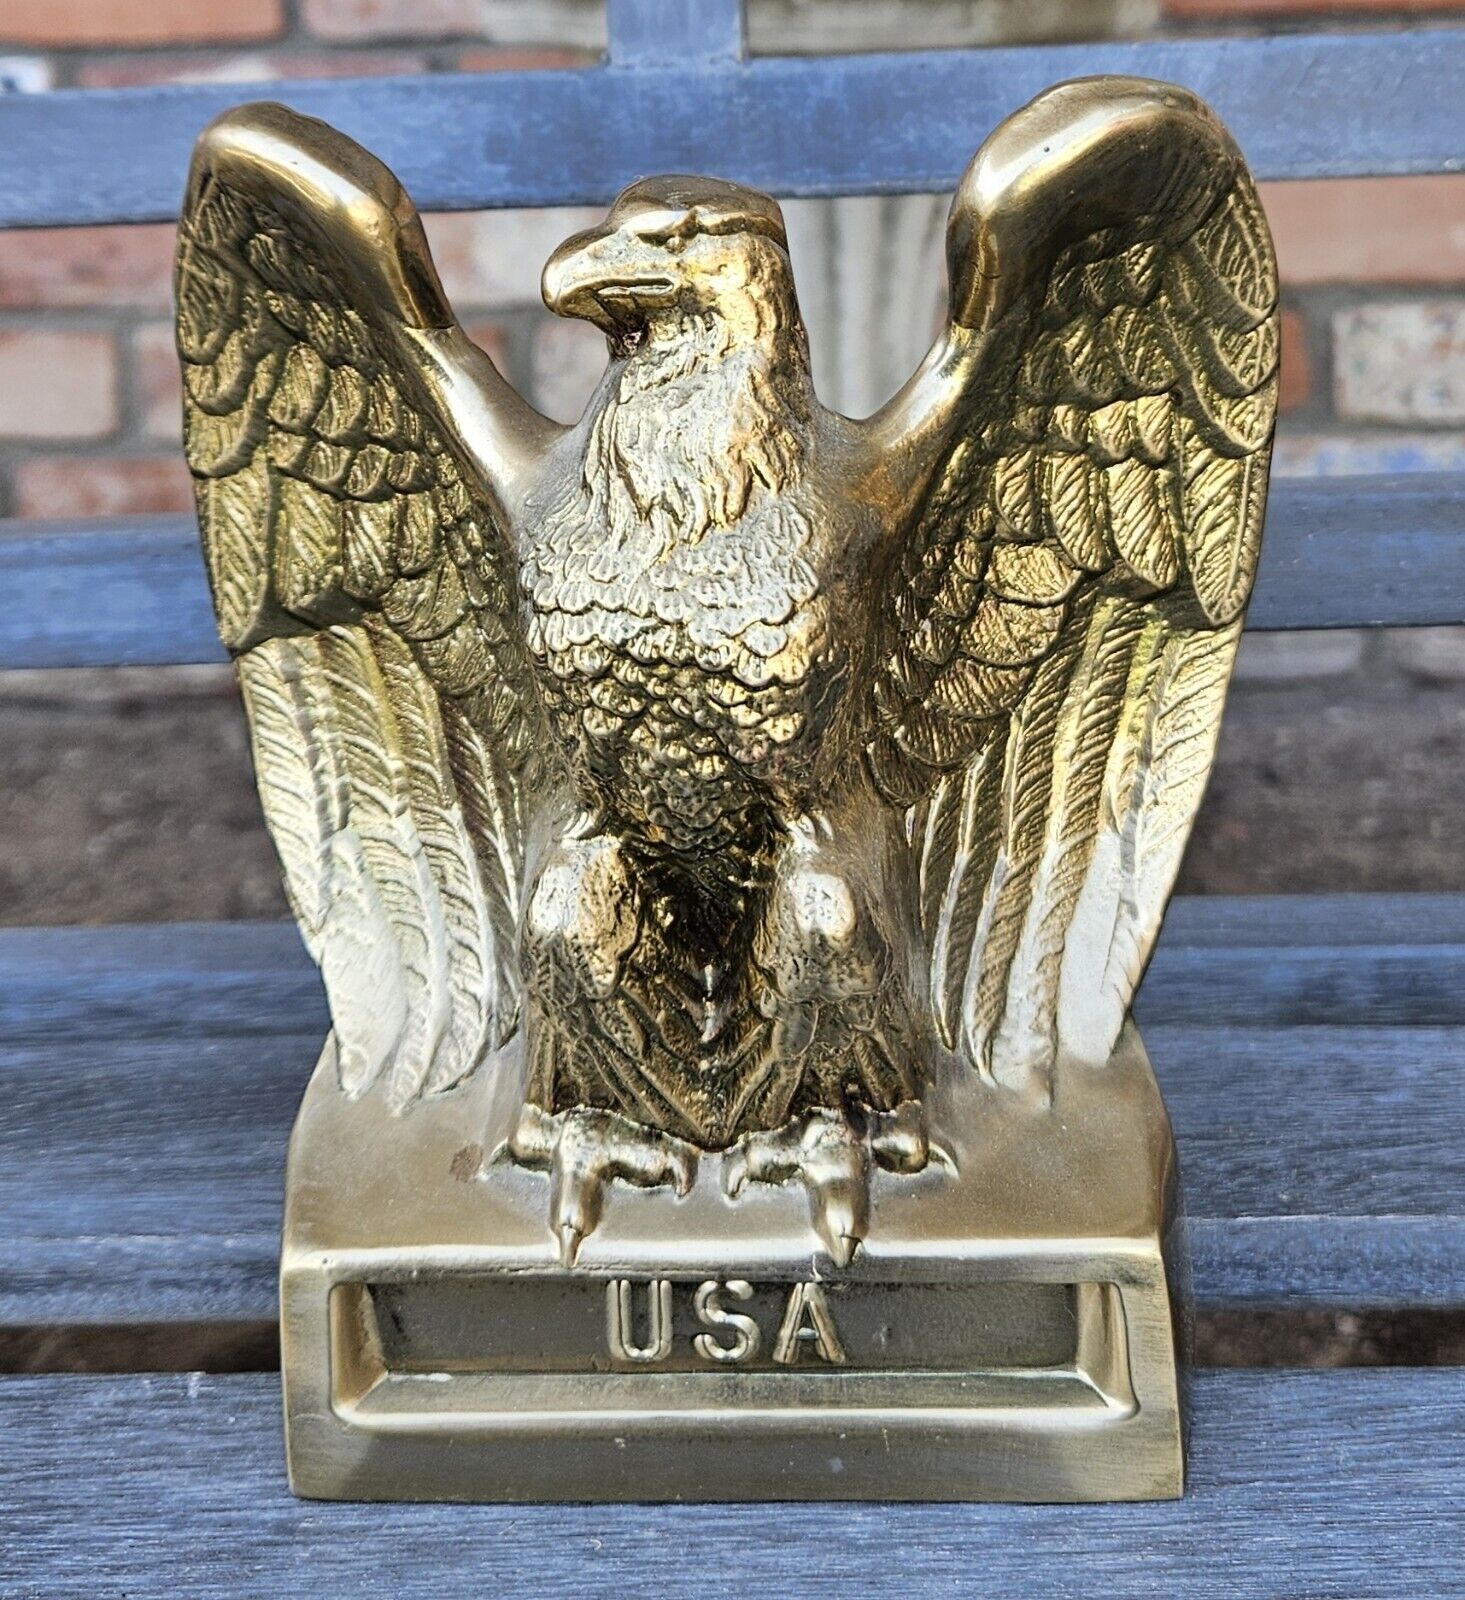 VVINTAGE PM CRAFTSMAN BRASS AMERICAN BALD EAGLE BOOKEND - EXCELLENT CONDITION